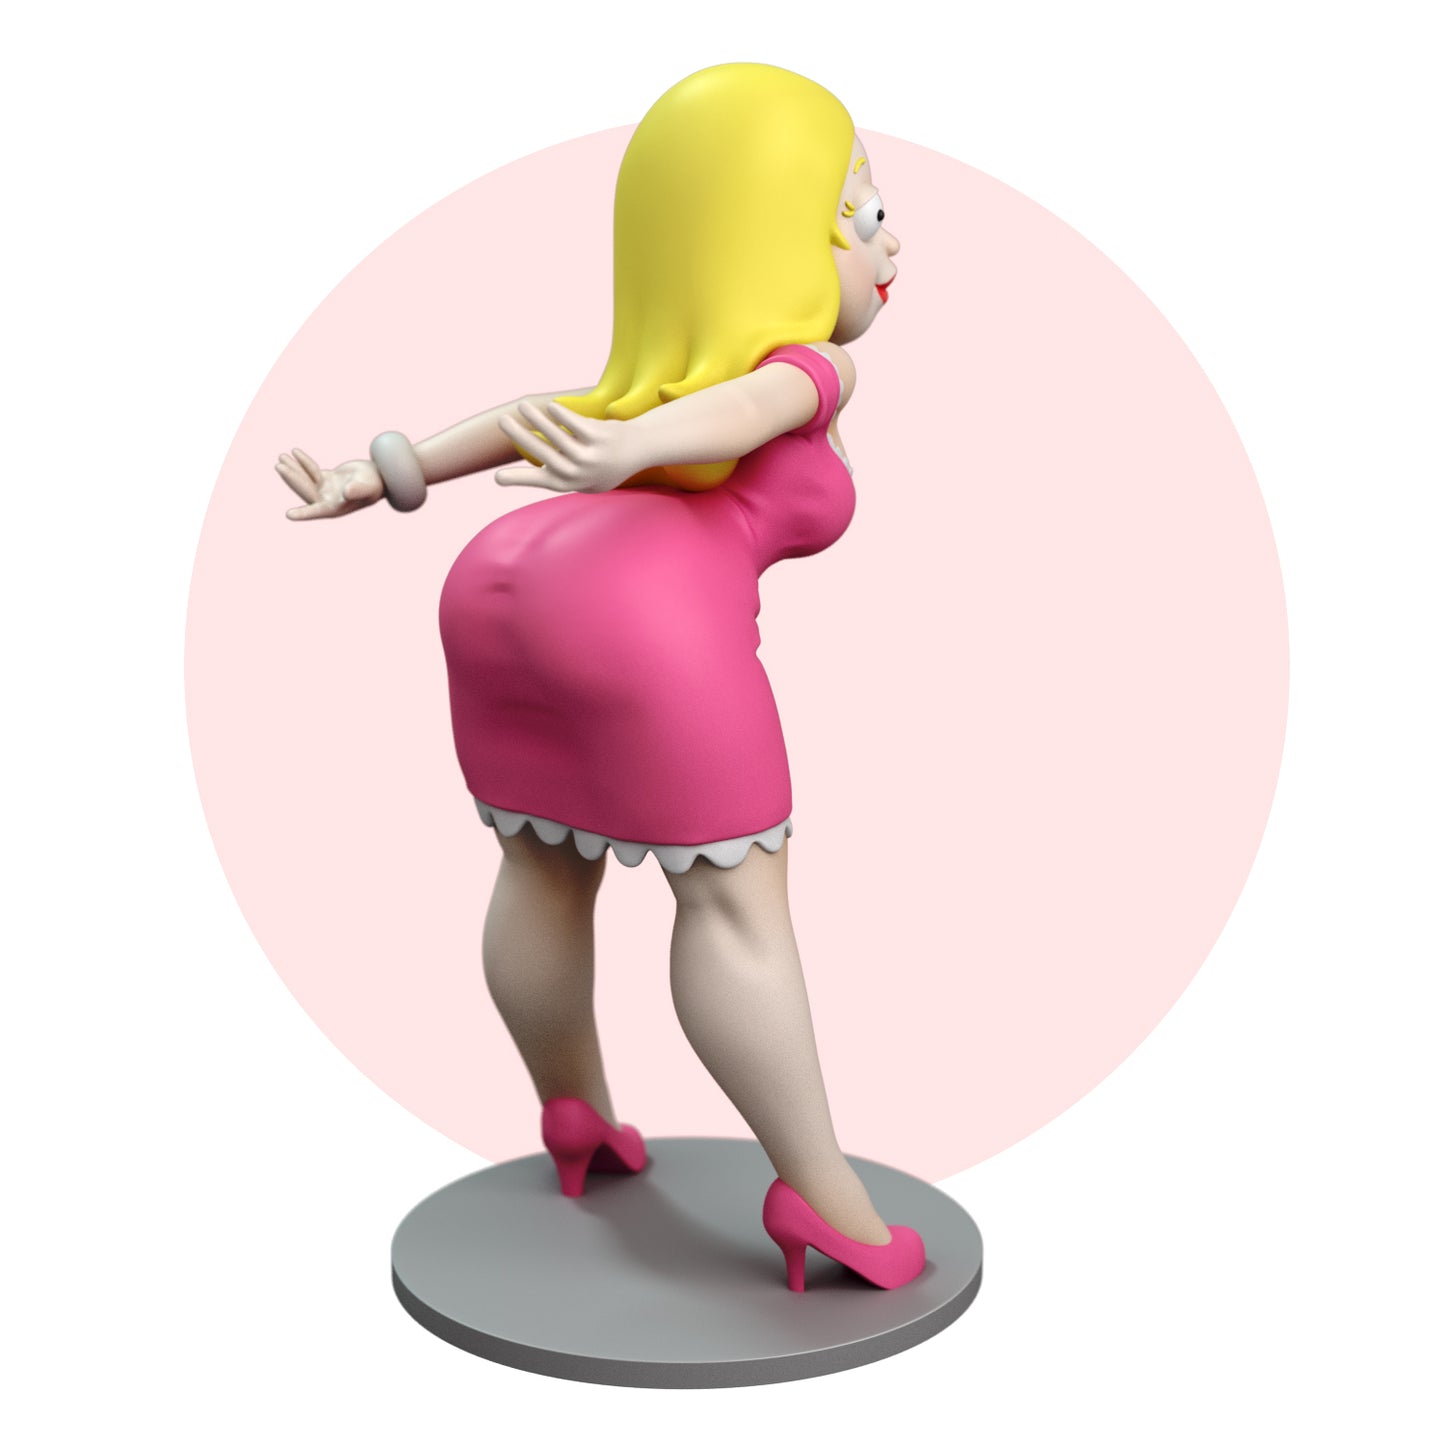 Fanart Blond Housewife PinUp Statuette